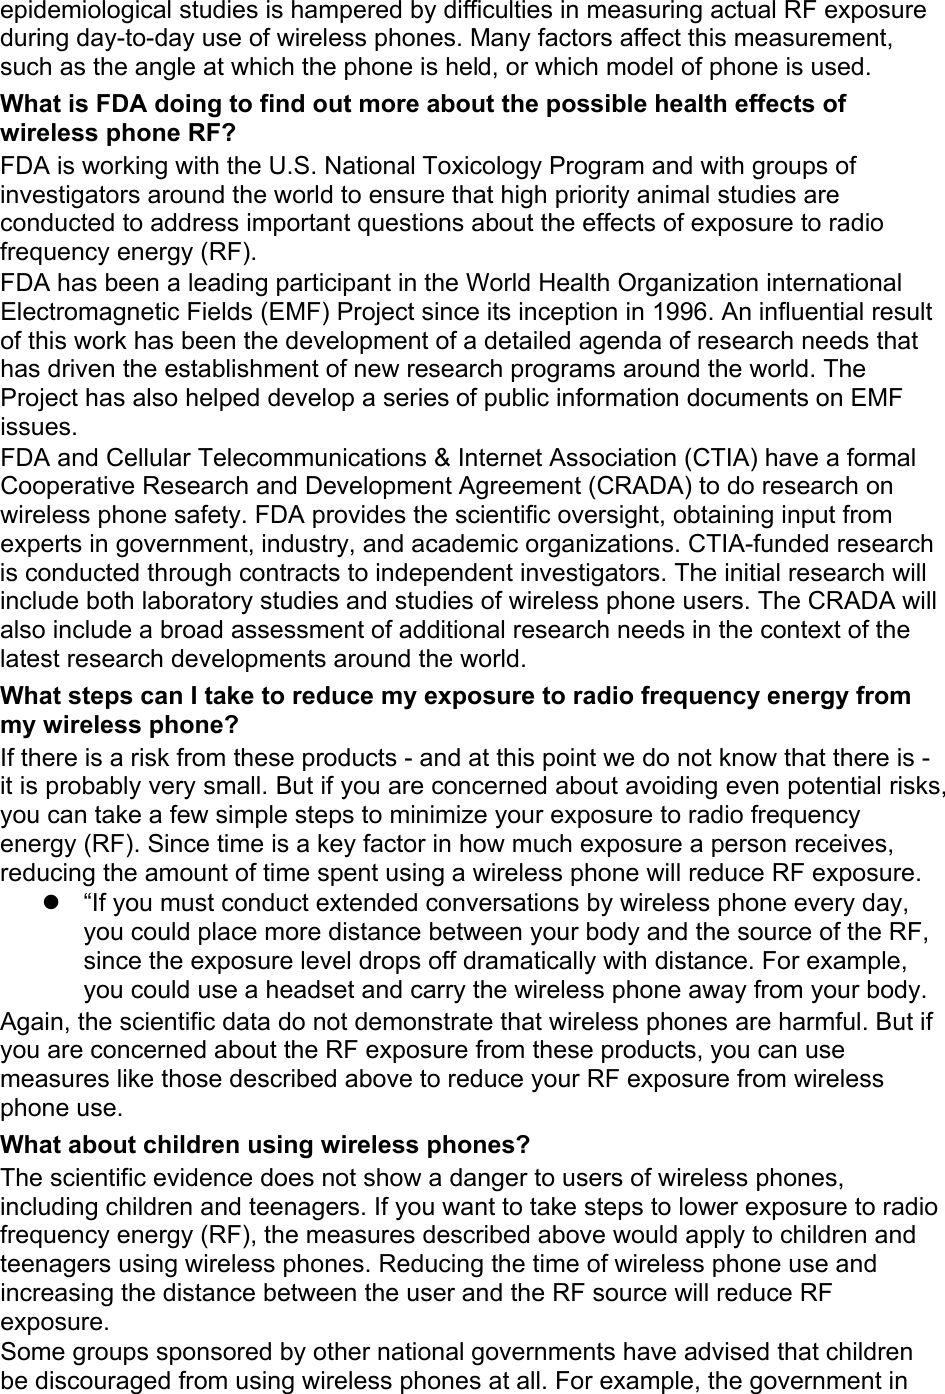 epidemiological studies is hampered by difficulties in measuring actual RF exposure during day-to-day use of wireless phones. Many factors affect this measurement, such as the angle at which the phone is held, or which model of phone is used.What is FDA doing to find out more about the possible health effects of wireless phone RF? FDA is working with the U.S. National Toxicology Program and with groups of investigators around the world to ensure that high priority animal studies are conducted to address important questions about the effects of exposure to radio frequency energy (RF).FDA has been a leading participant in the World Health Organization international Electromagnetic Fields (EMF) Project since its inception in 1996. An influential result of this work has been the development of a detailed agenda of research needs that has driven the establishment of new research programs around the world. The Project has also helped develop a series of public information documents on EMF issues.FDA and Cellular Telecommunications &amp; Internet Association (CTIA) have a formal Cooperative Research and Development Agreement (CRADA) to do research on wireless phone safety. FDA provides the scientific oversight, obtaining input from experts in government, industry, and academic organizations. CTIA-funded research is conducted through contracts to independent investigators. The initial research will include both laboratory studies and studies of wireless phone users. The CRADA will also include a broad assessment of additional research needs in the context of the latest research developments around the world.What steps can I take to reduce my exposure to radio frequency energy from my wireless phone? If there is a risk from these products - and at this point we do not know that there is - it is probably very small. But if you are concerned about avoiding even potential risks, you can take a few simple steps to minimize your exposure to radio frequency energy (RF). Since time is a key factor in how much exposure a person receives, reducing the amount of time spent using a wireless phone will reduce RF exposure.  “If you must conduct extended conversations by wireless phone every day, you could place more distance between your body and the source of the RF, since the exposure level drops off dramatically with distance. For example, you could use a headset and carry the wireless phone away from your body.Again, the scientific data do not demonstrate that wireless phones are harmful. But if you are concerned about the RF exposure from these products, you can use measures like those described above to reduce your RF exposure from wireless phone use.What about children using wireless phones? The scientific evidence does not show a danger to users of wireless phones, including children and teenagers. If you want to take steps to lower exposure to radio frequency energy (RF), the measures described above would apply to children and teenagers using wireless phones. Reducing the time of wireless phone use and increasing the distance between the user and the RF source will reduce RF exposure.Some groups sponsored by other national governments have advised that children be discouraged from using wireless phones at all. For example, the government in 